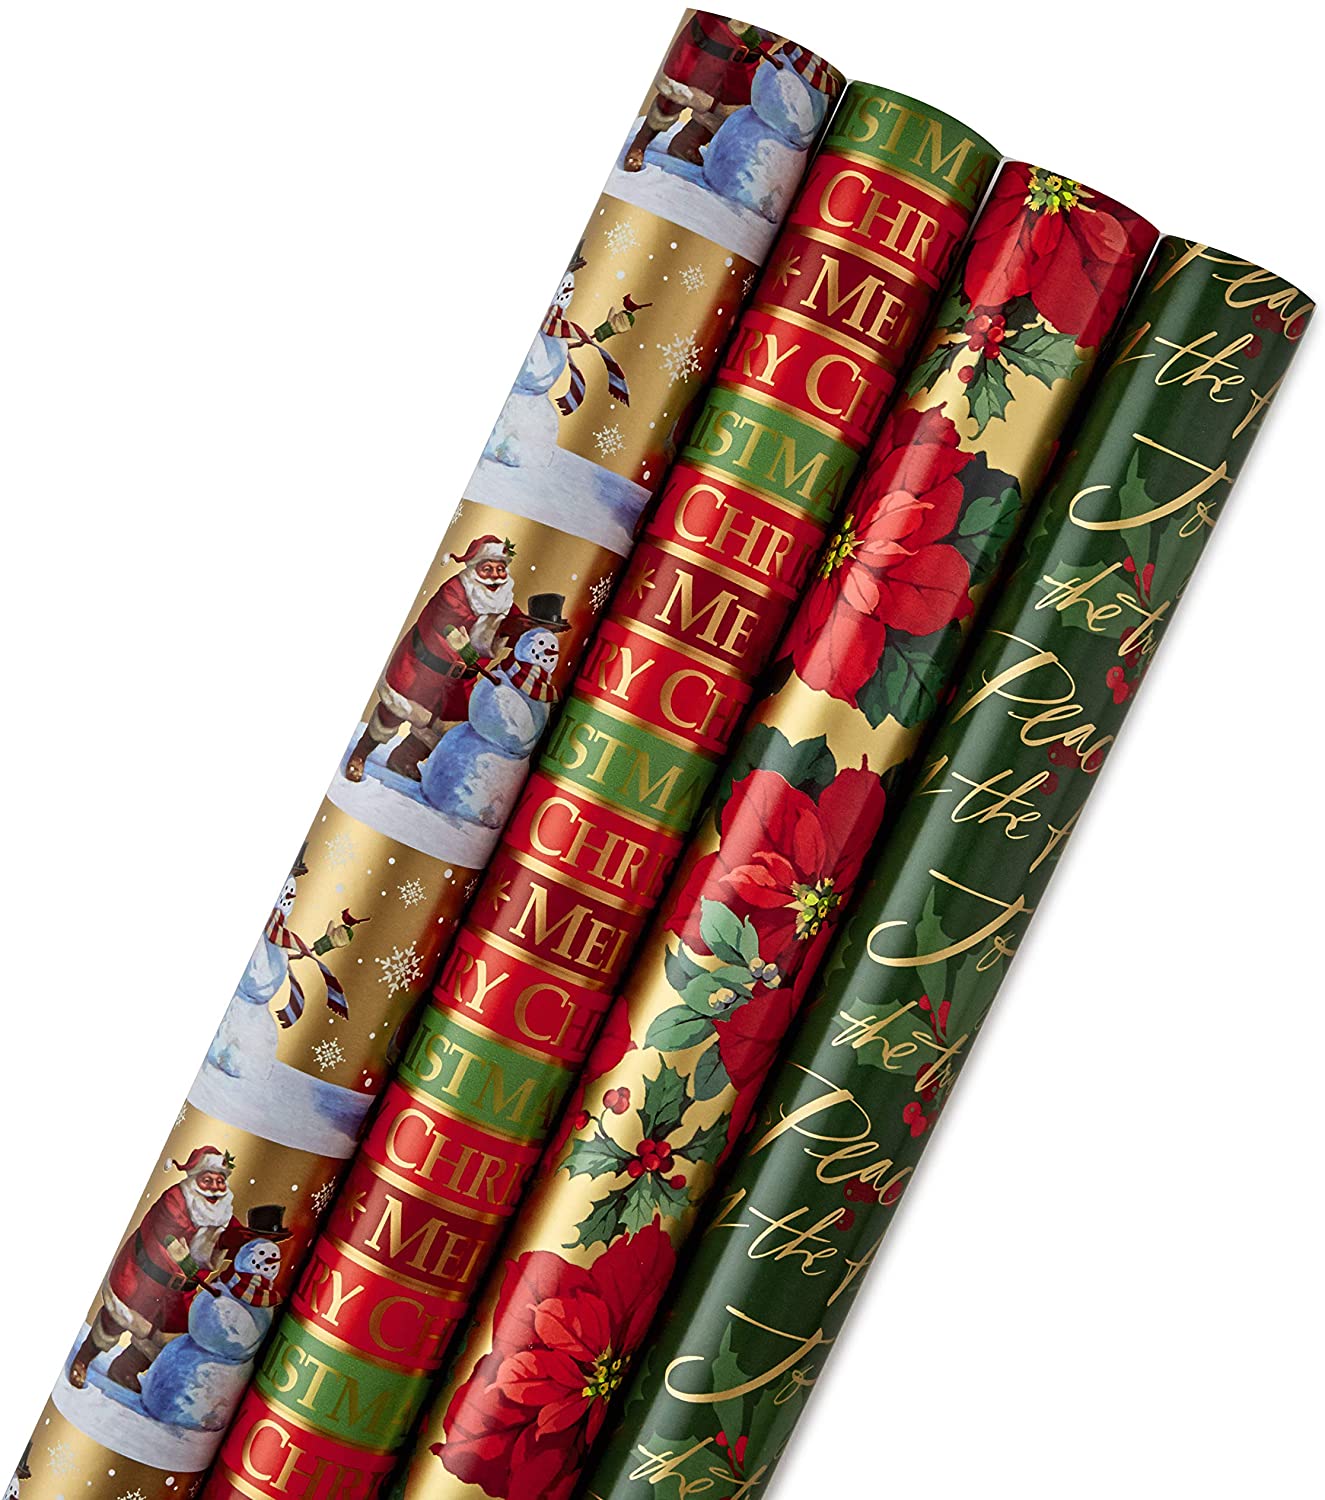 4-Pk. Hallmark Reversible Christmas Wrapping Paper Bundle (Traditional) $9.99 + Free Shipping w/Prime